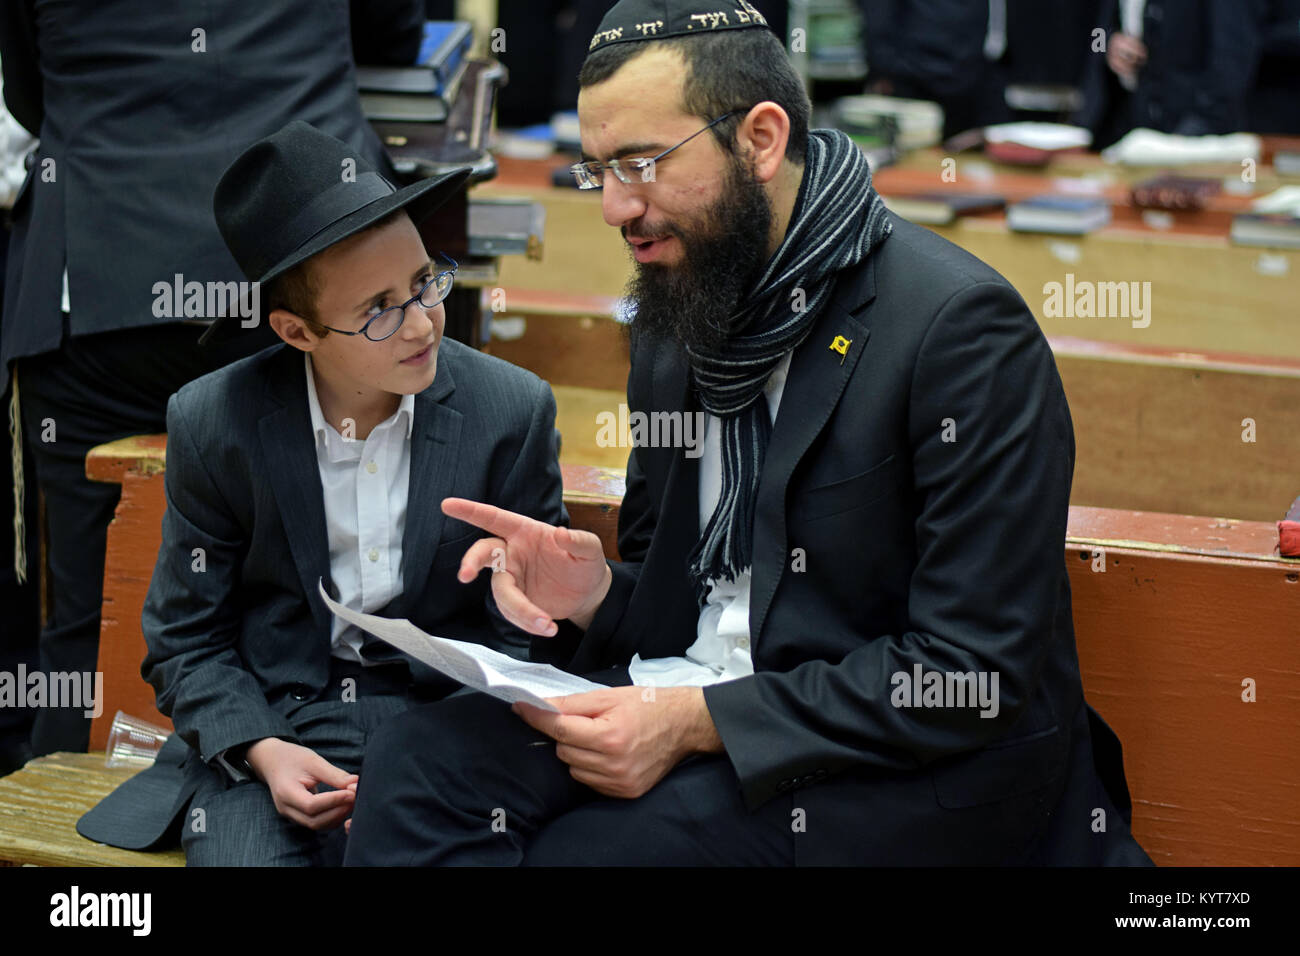 A teacher and student (presumably father & son) learning together at a synagogue in Brooklyn, New York. Stock Photo